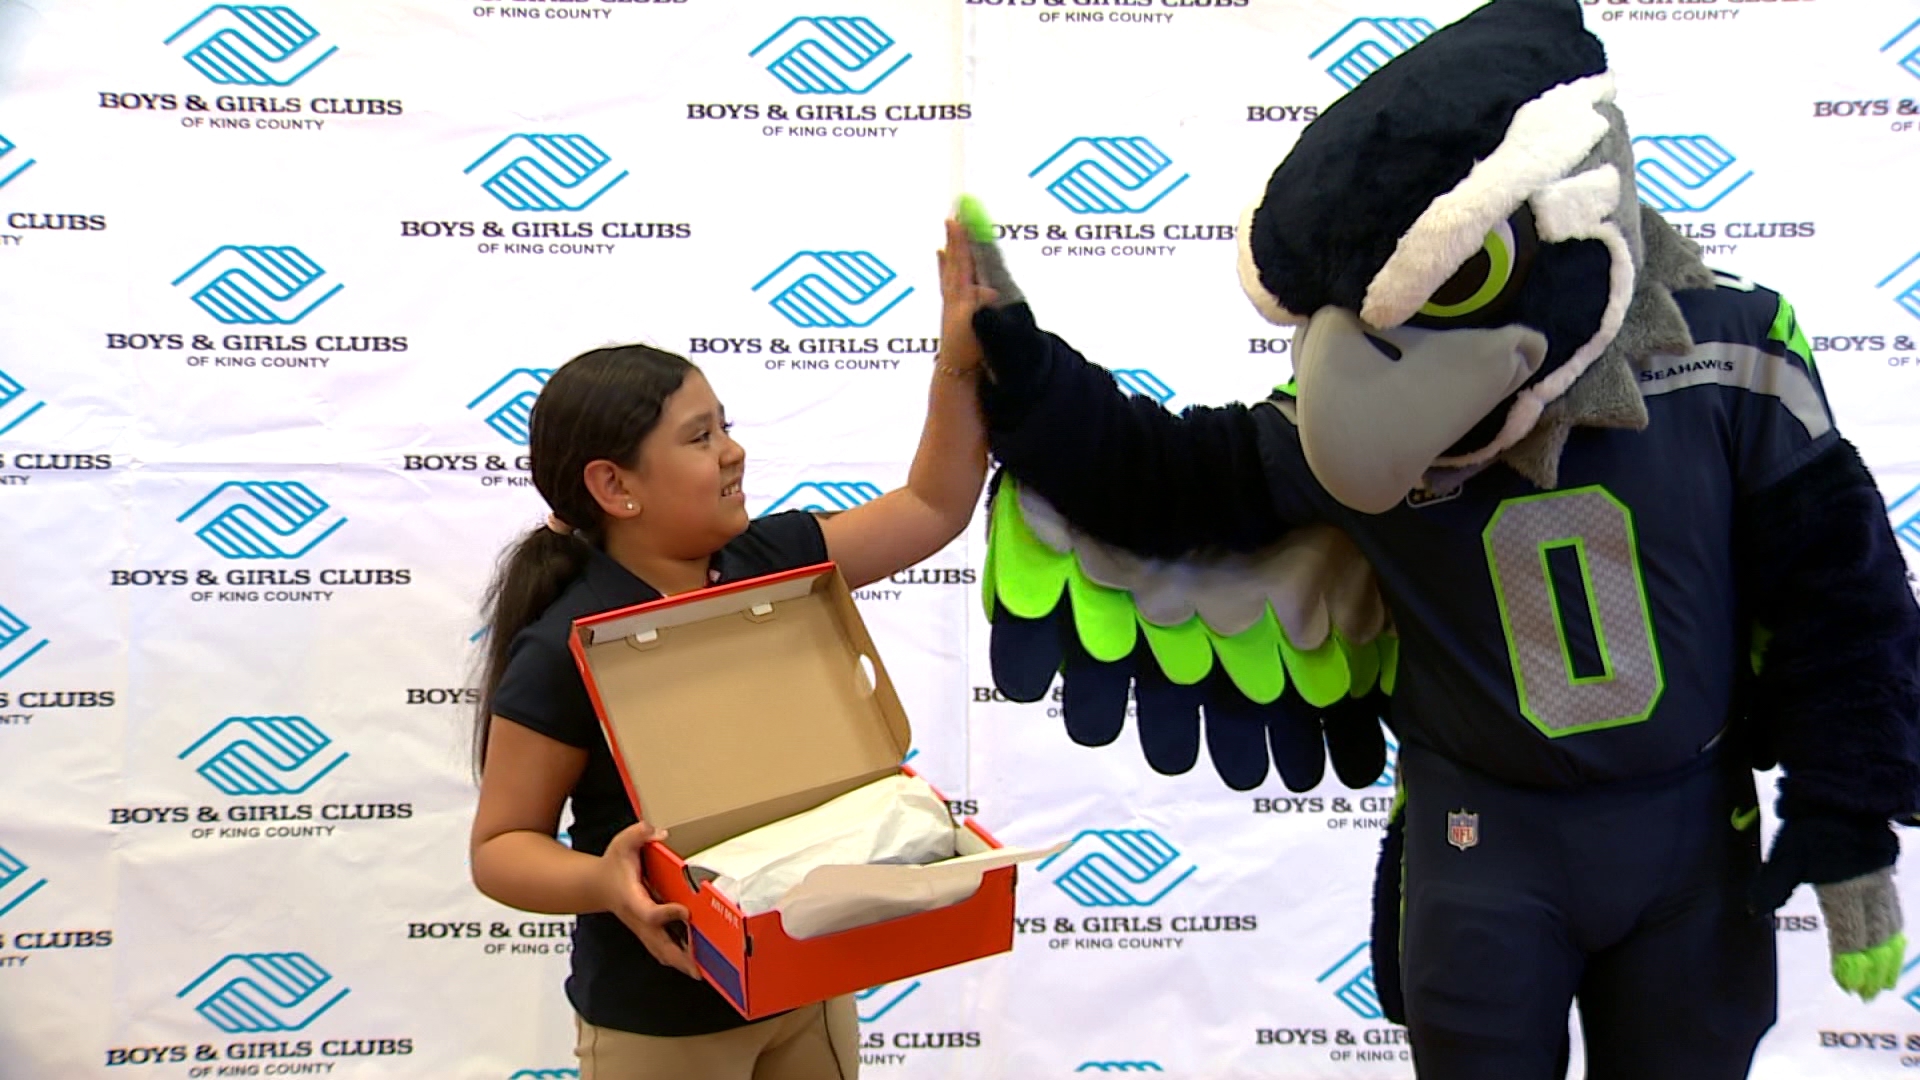 The giveaway was fueled by Blitz's annual Kicks 4 Kids fundraiser.